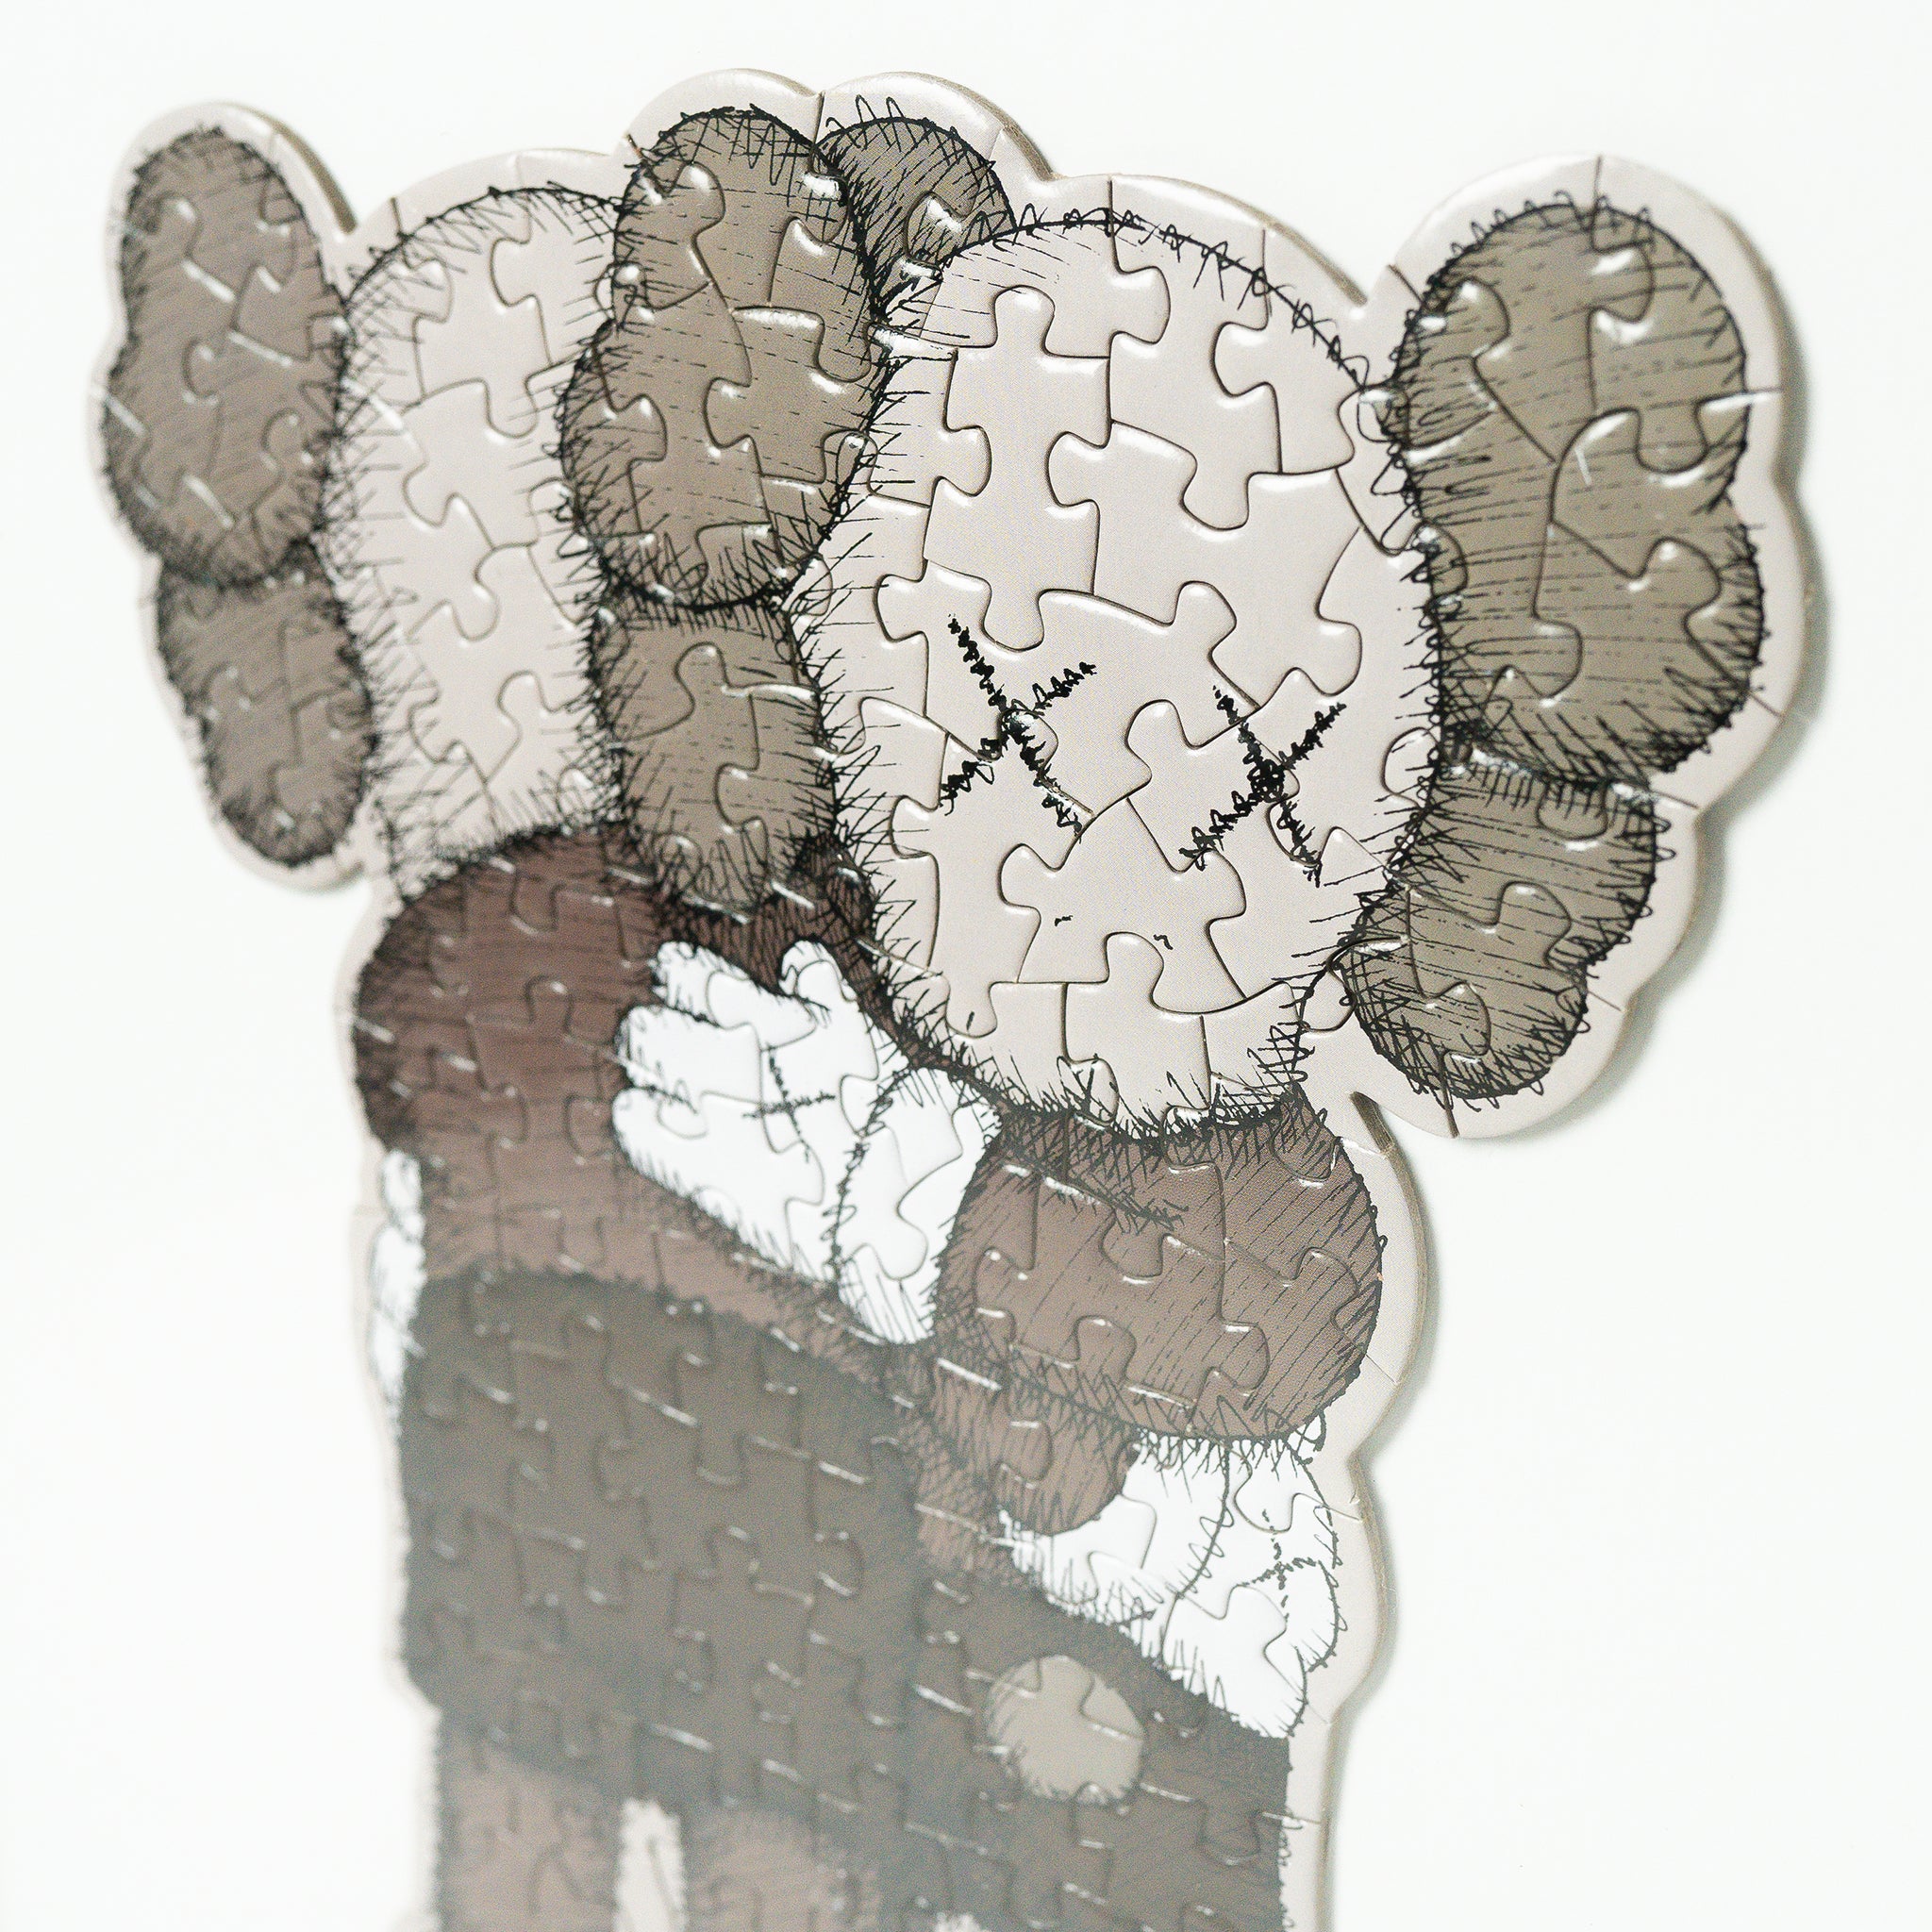 KAWS Together Small Jigsaw Puzzle (100 Pieces) - US